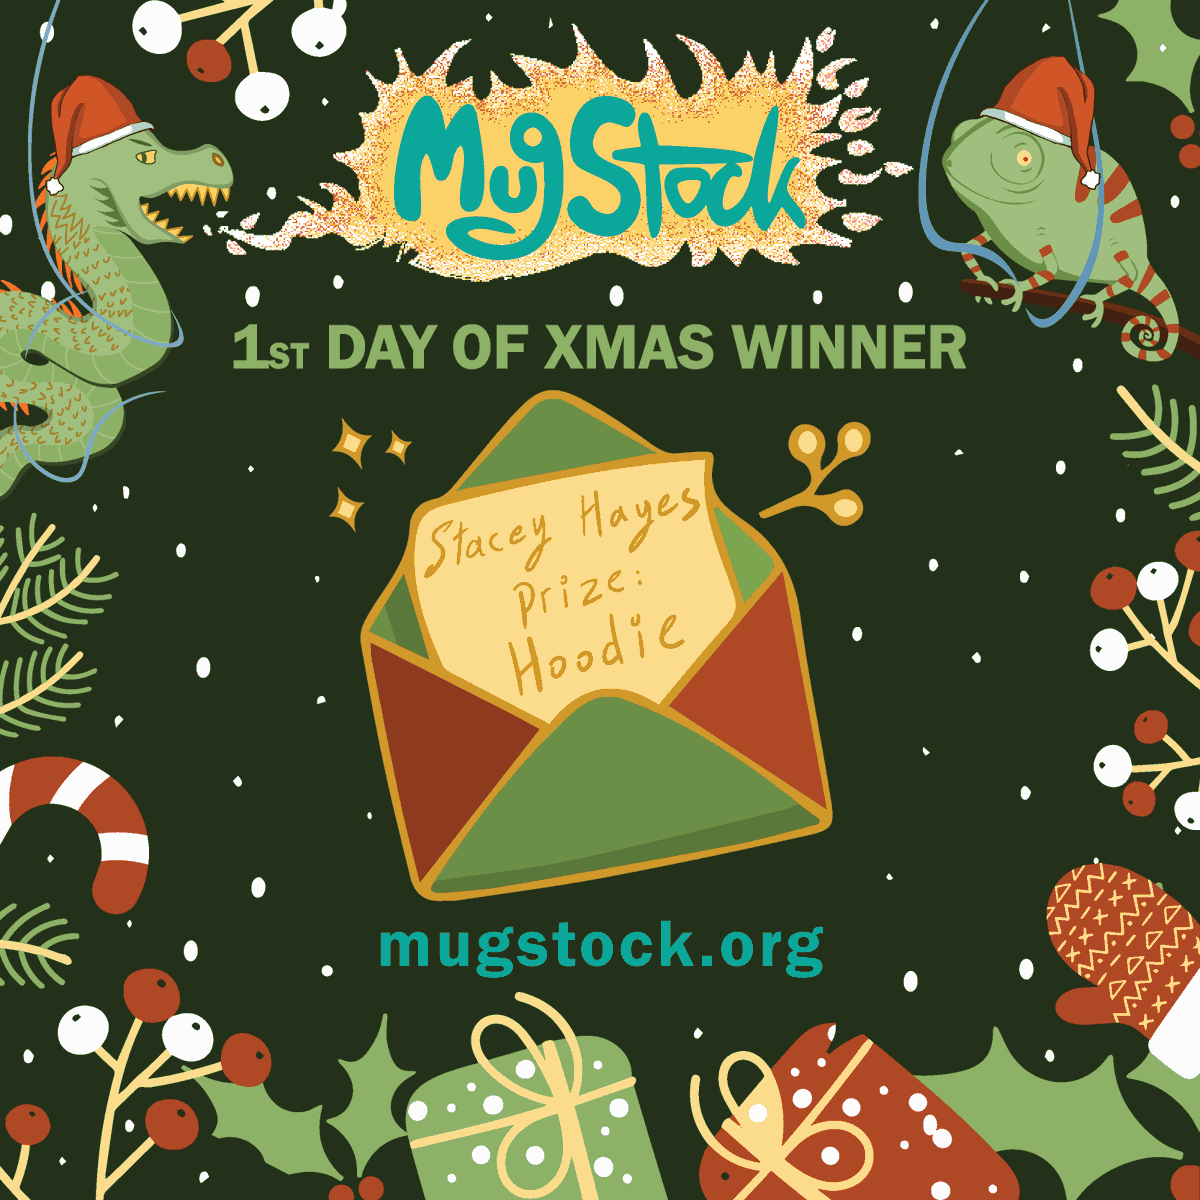 Congratulations to the 1st winner of our 12 Days of Christmas Giveaway! 🎉 There's still 11 gifts up for grabs: 🎁 3 x MugStock Hoodies 4 x MugStock T-Shirts 3 x MugStock Mugs 1 x Pair of Adult Weekend Tickets So get your tickets to be entered 🎟️ mugstock.org/tickets/